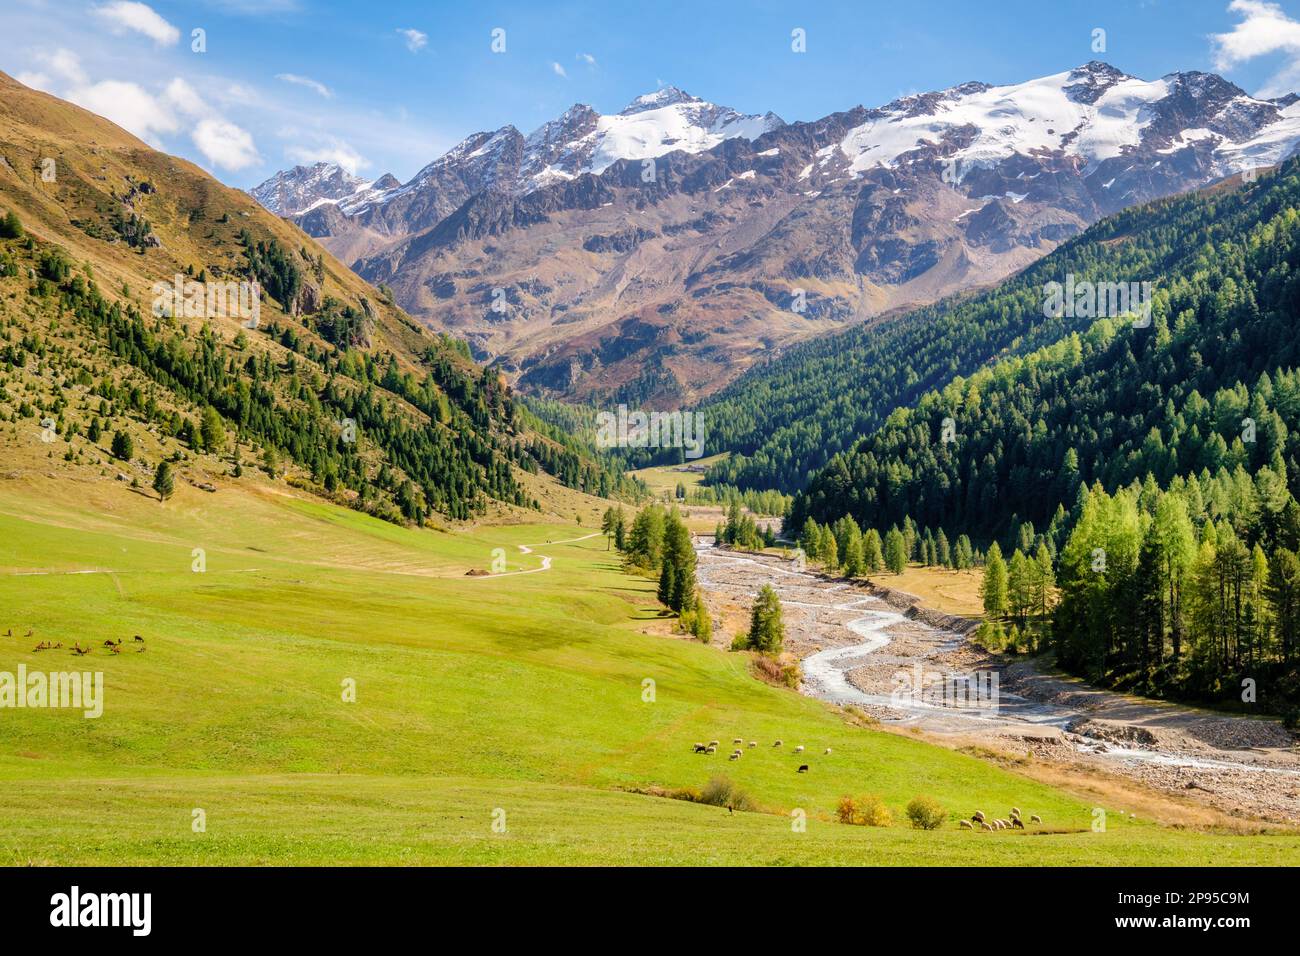 A September day in Vallelunga (or: Langtaufers), a valley in South Tyrol, Italy. It is a side valley of the Venosta (or Vinschgau) valley. Stock Photo